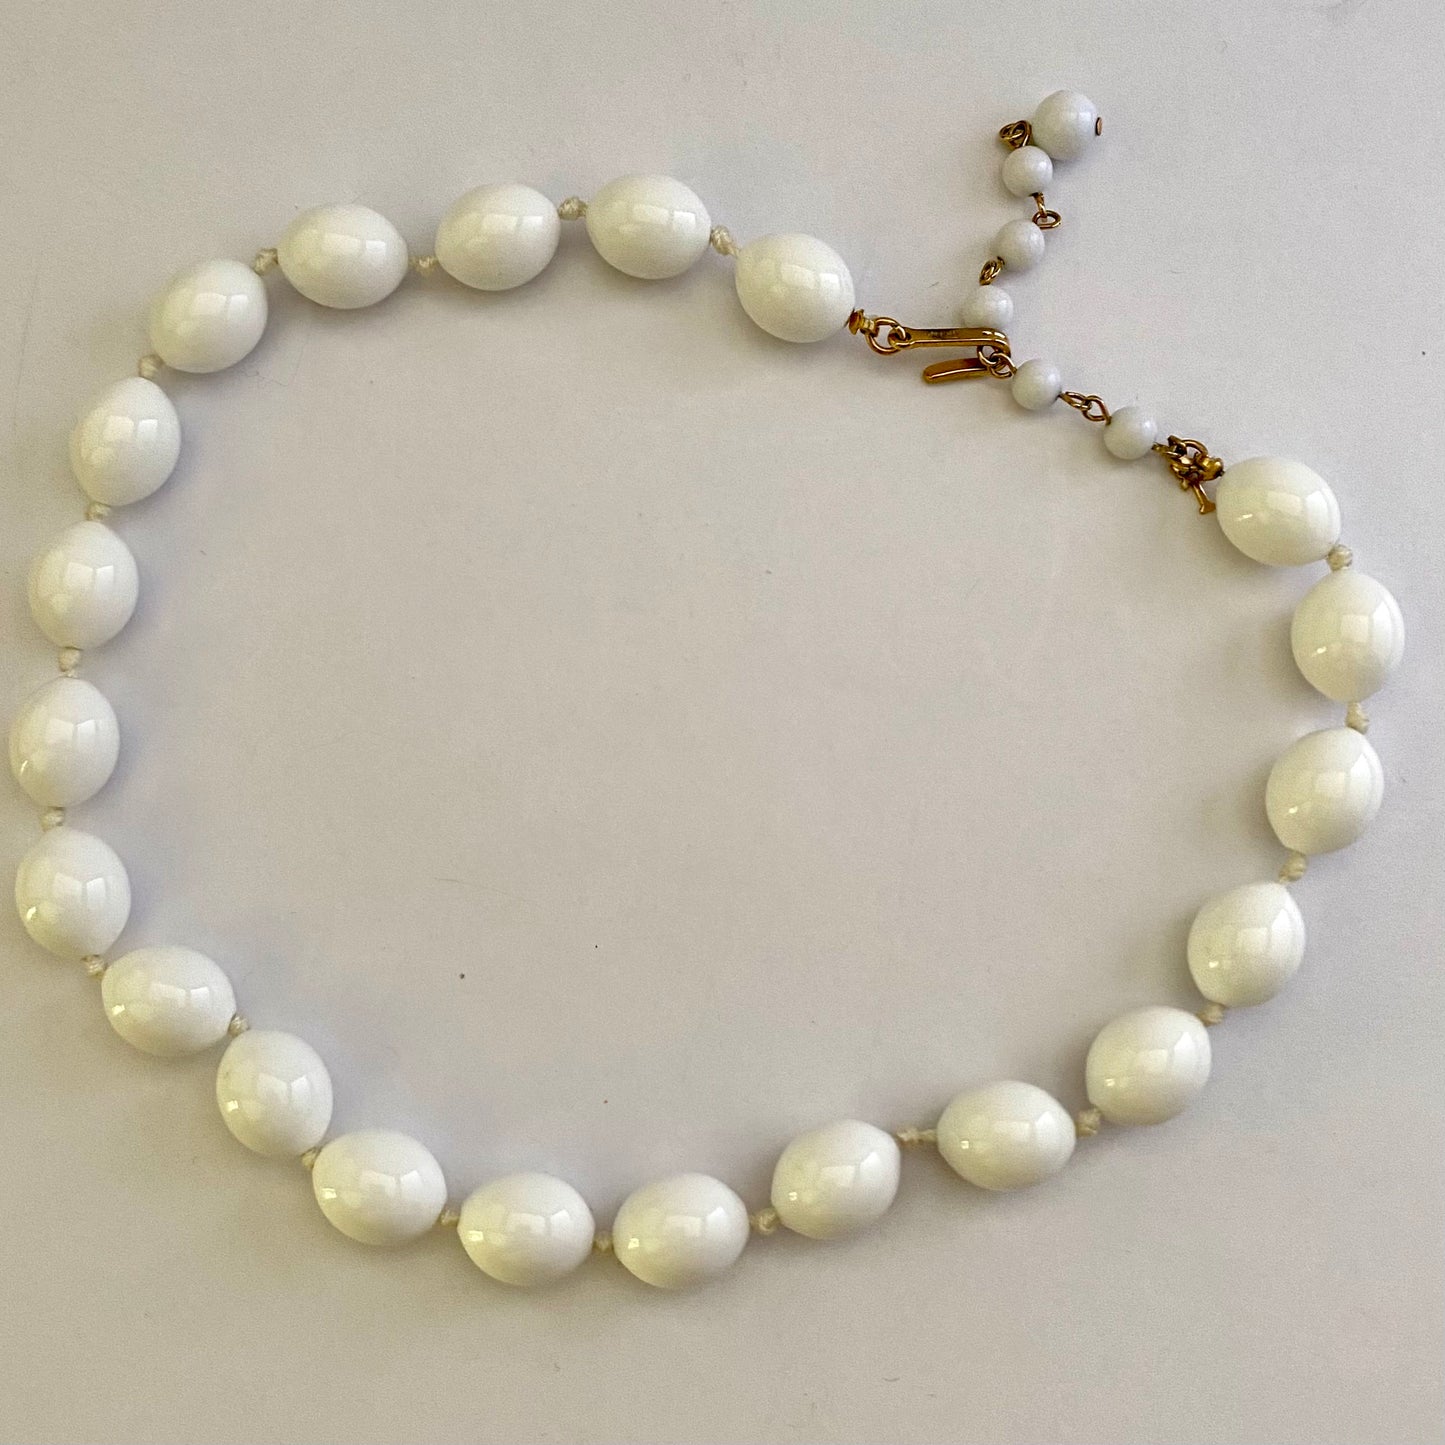 1950s Trifari Hand-Knotted Bead Necklace